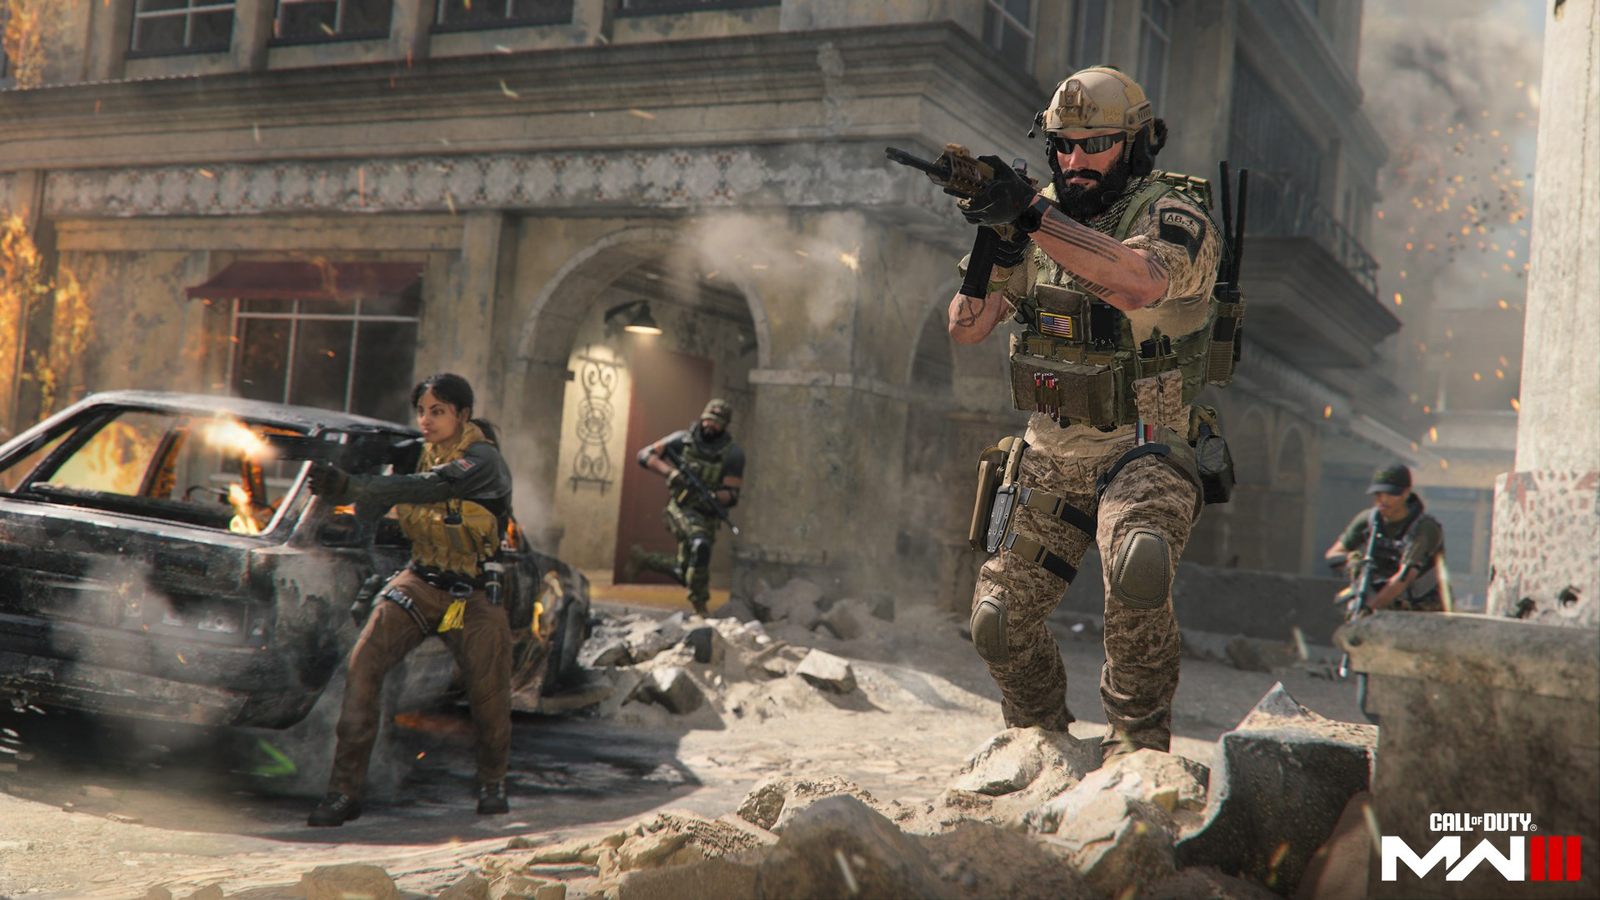 Call of Duty's new Combat Readiness Program makes multiplayer more